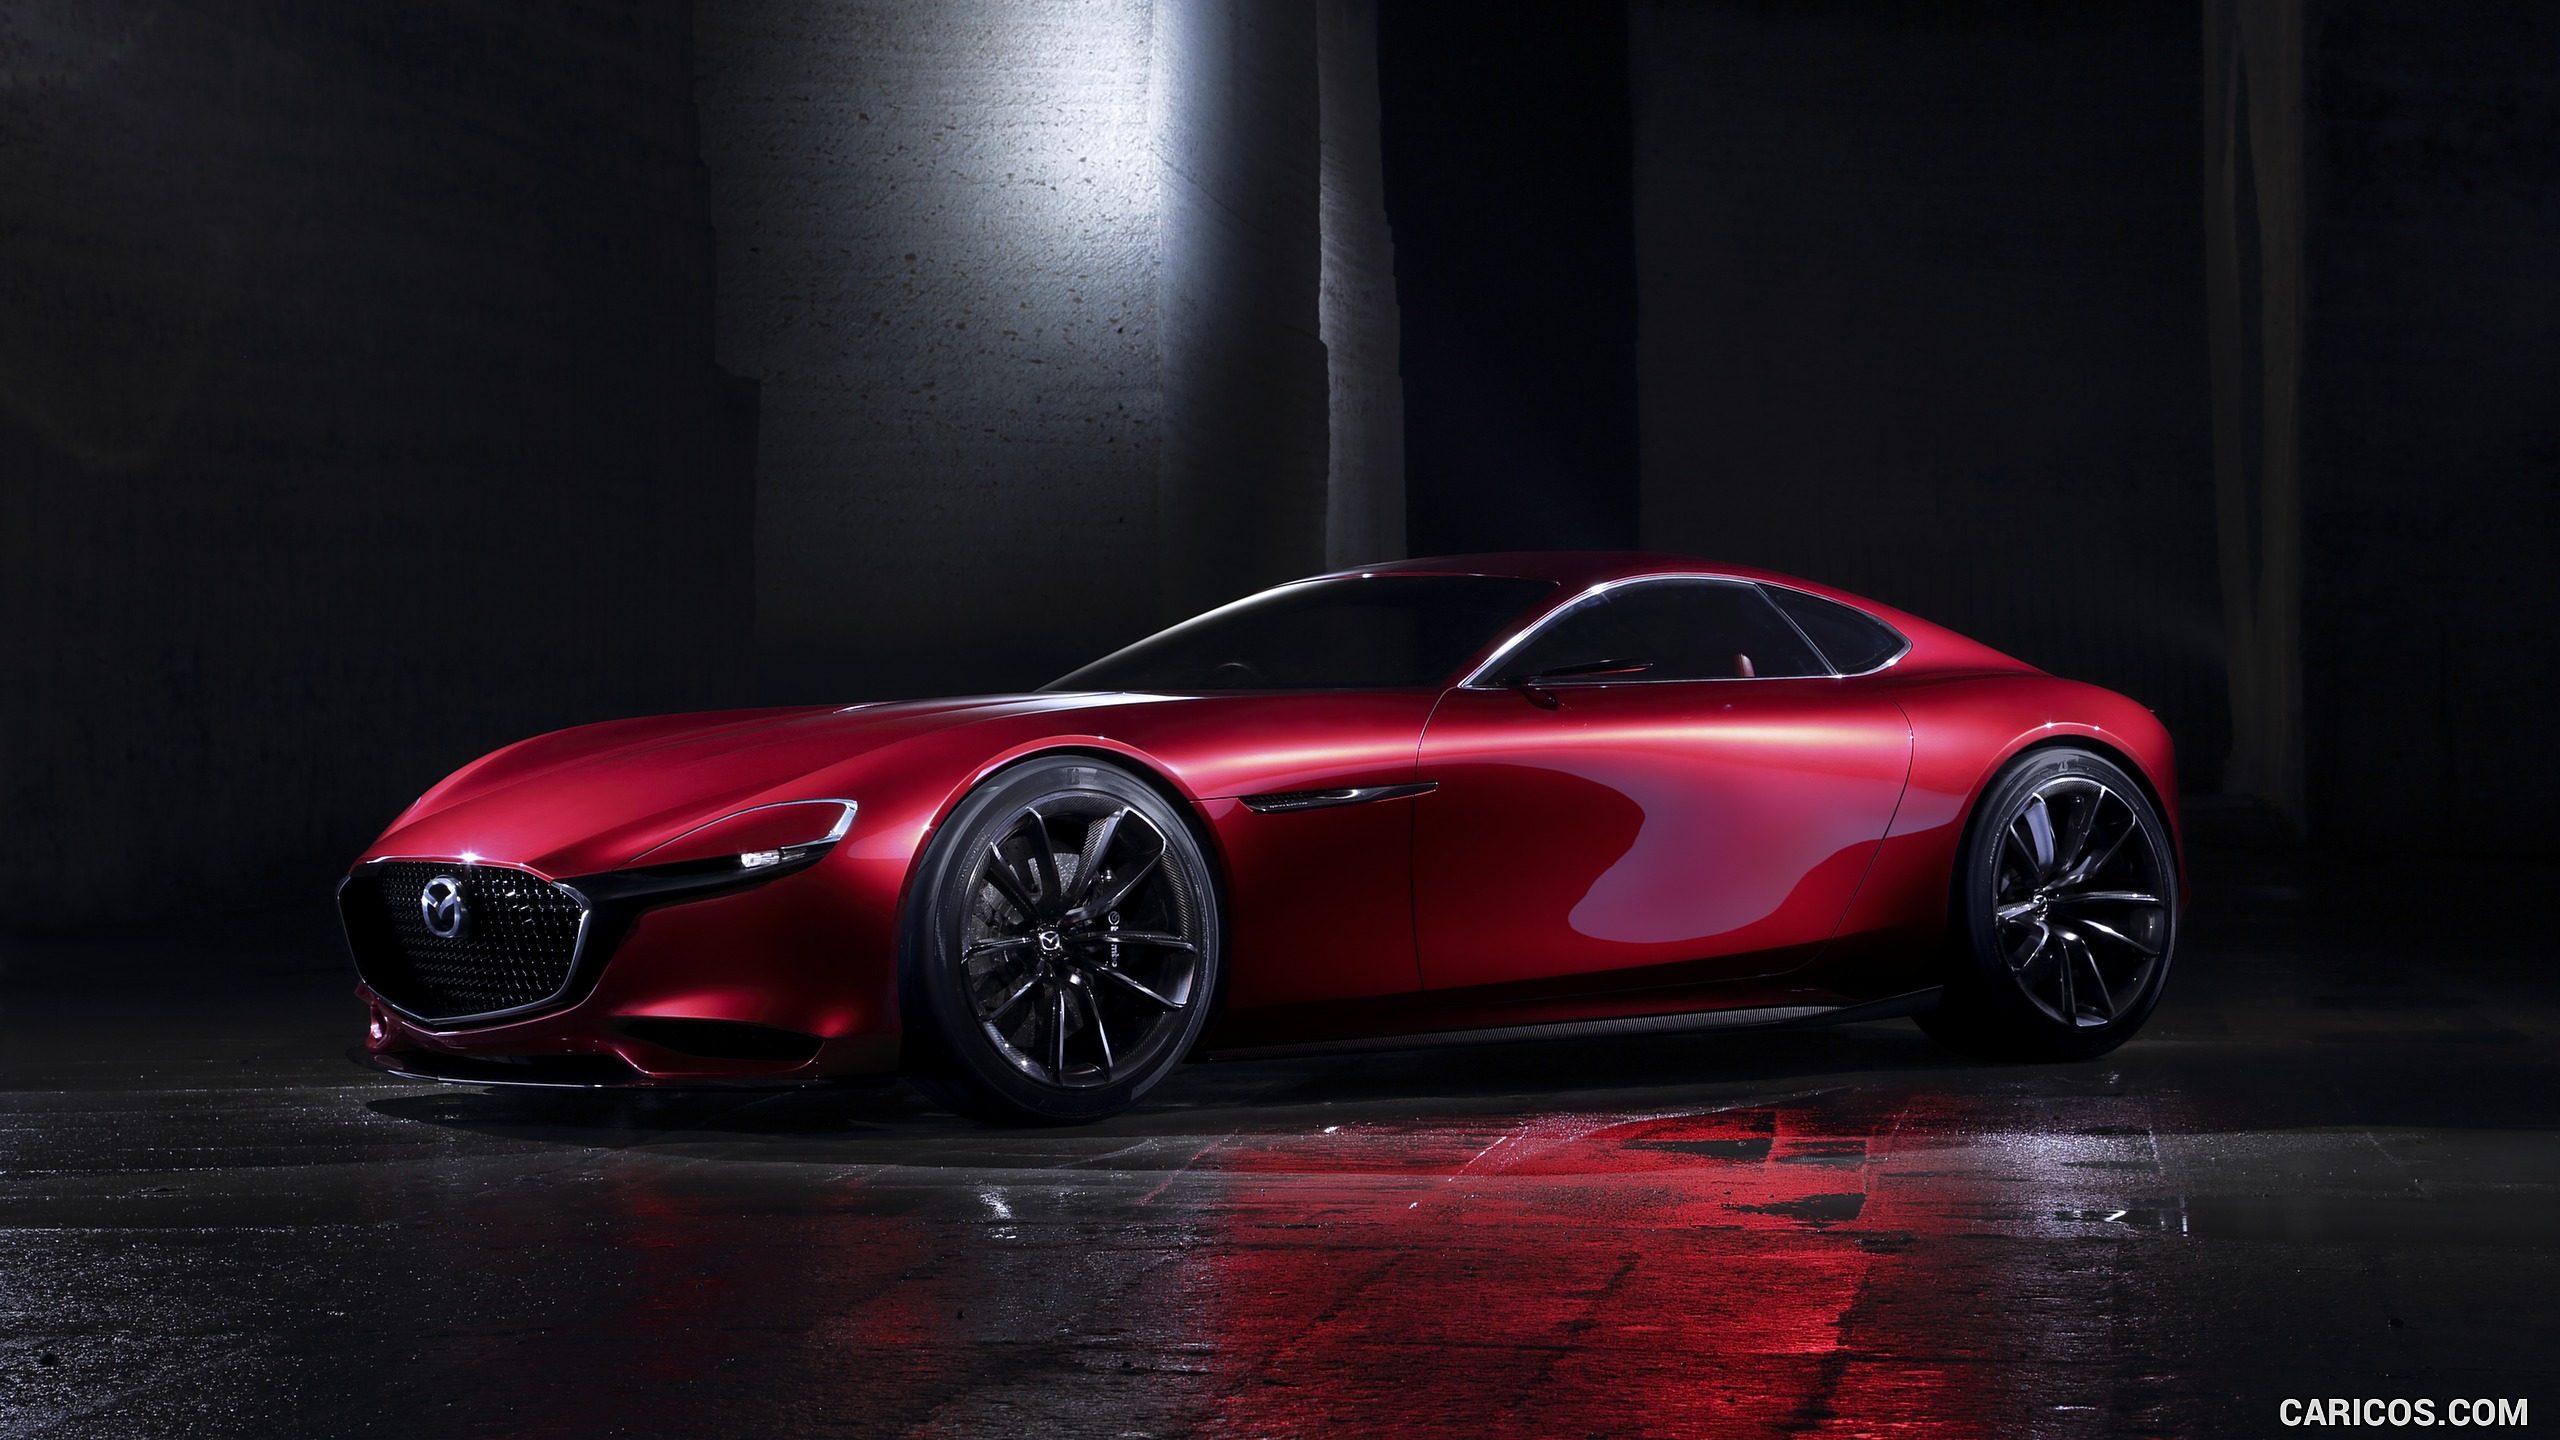 2015 Mazda RX-VISION Concept - Front, #2 of 16